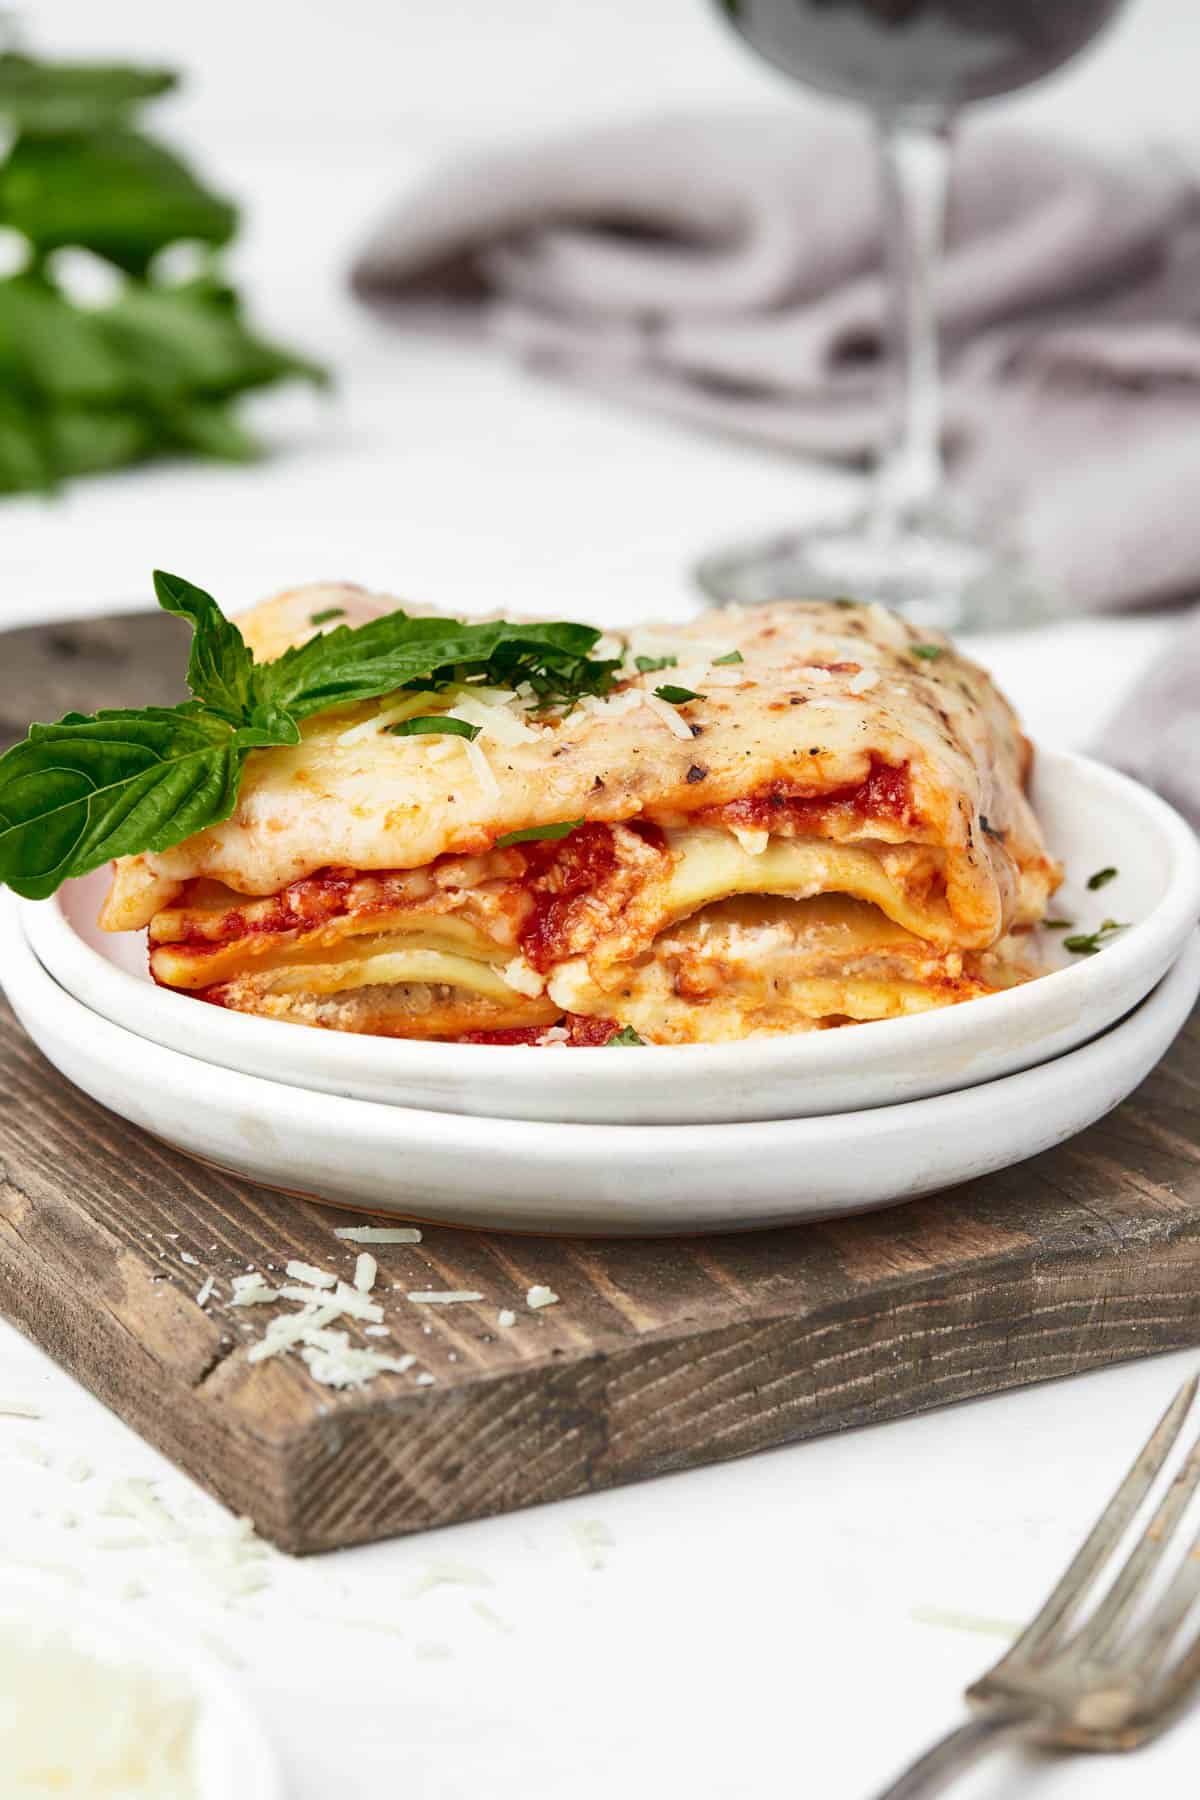 A plate of ravioli lasagna on a wooden cutting board.